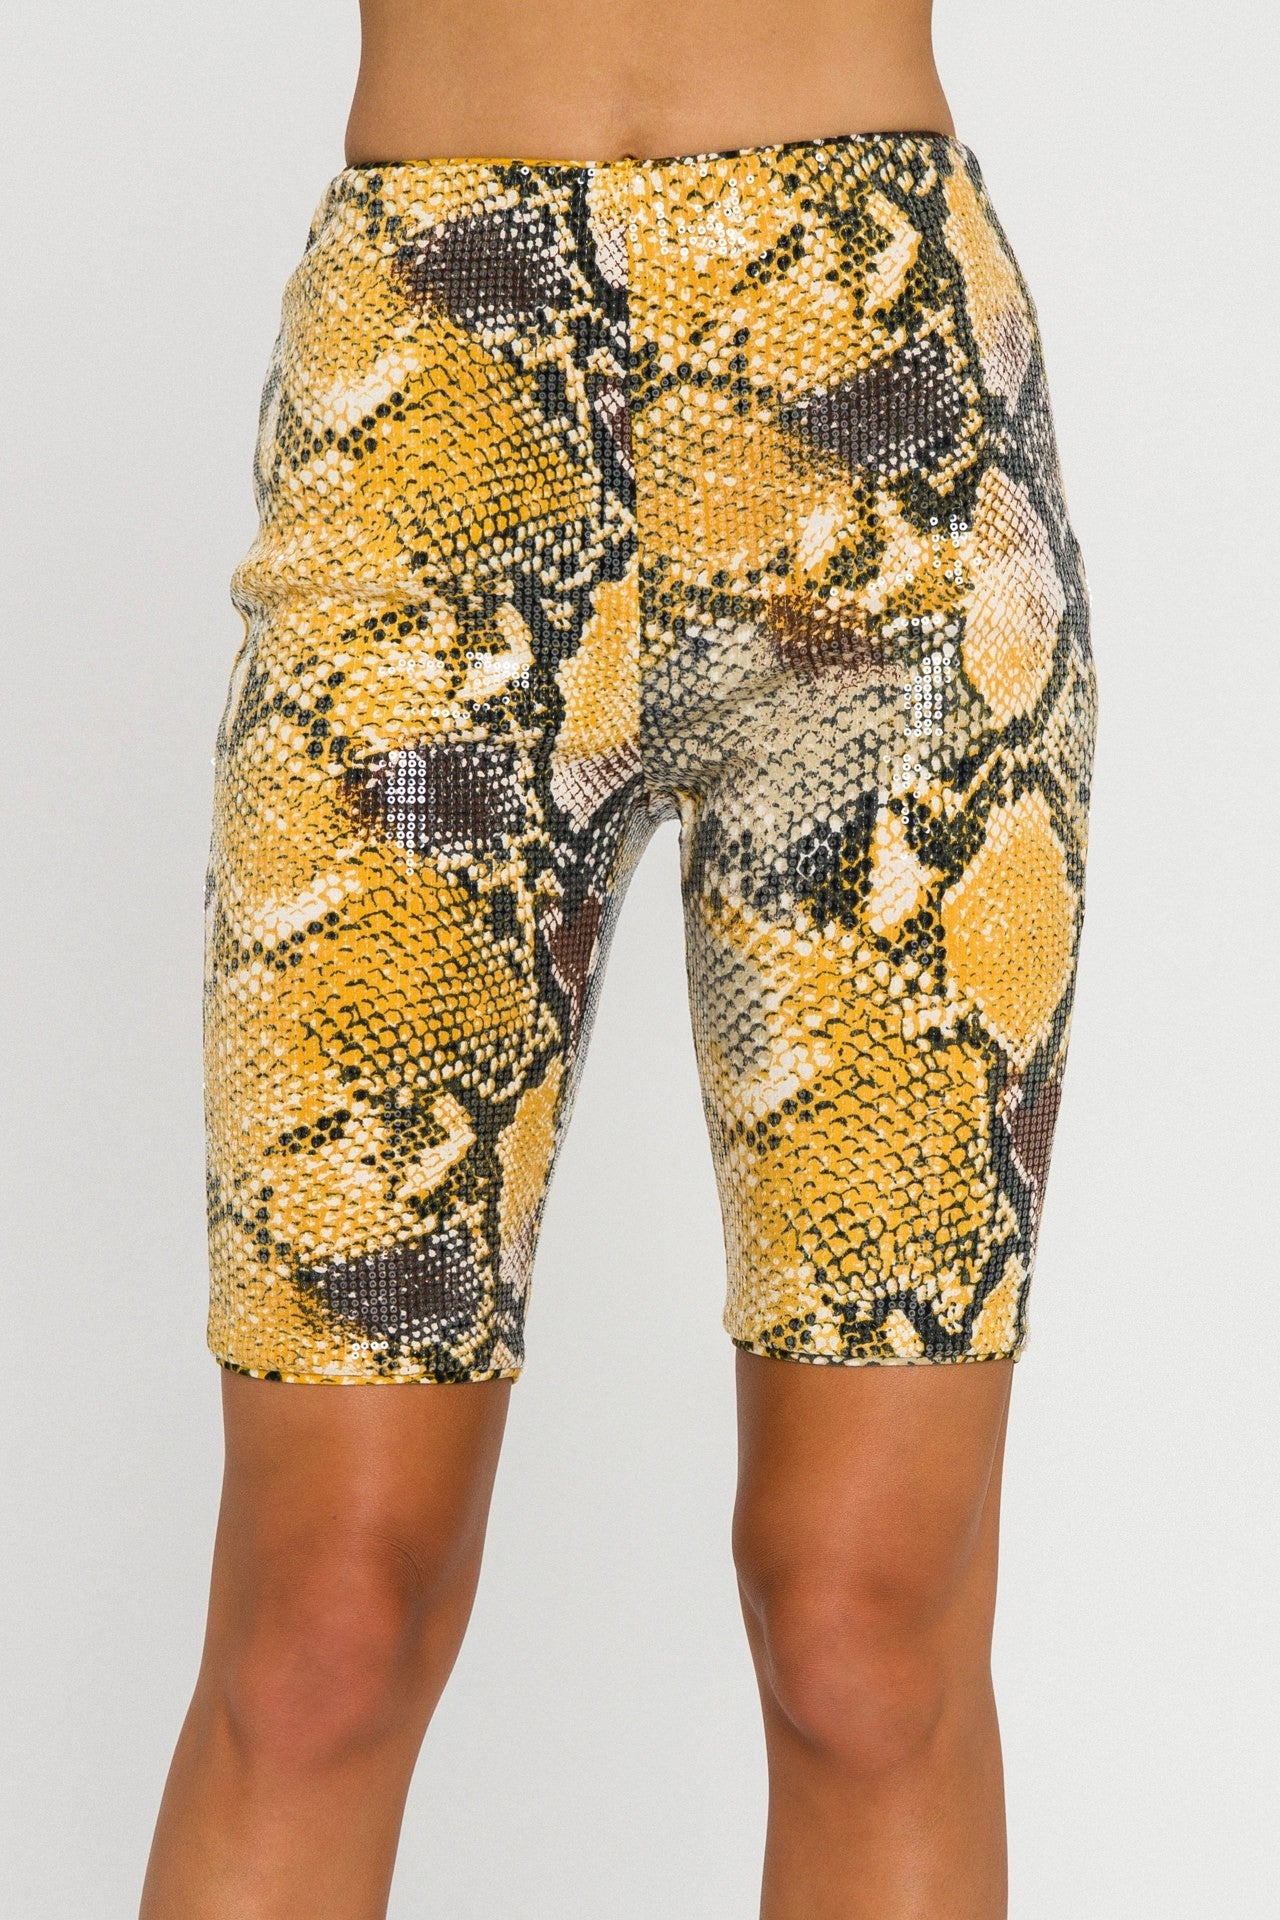 UNIKONCEPT LIFESTYLE BOUTIQUE: This model is wearing the Python Bike shorts by English factory in a black, yellow, brown and cream python snake pattern which is layered with clear sparkly sequin. The shorts are high waisted and feature an invisible zipper on the side seam for an easier fit. They are lined for extra comfort.